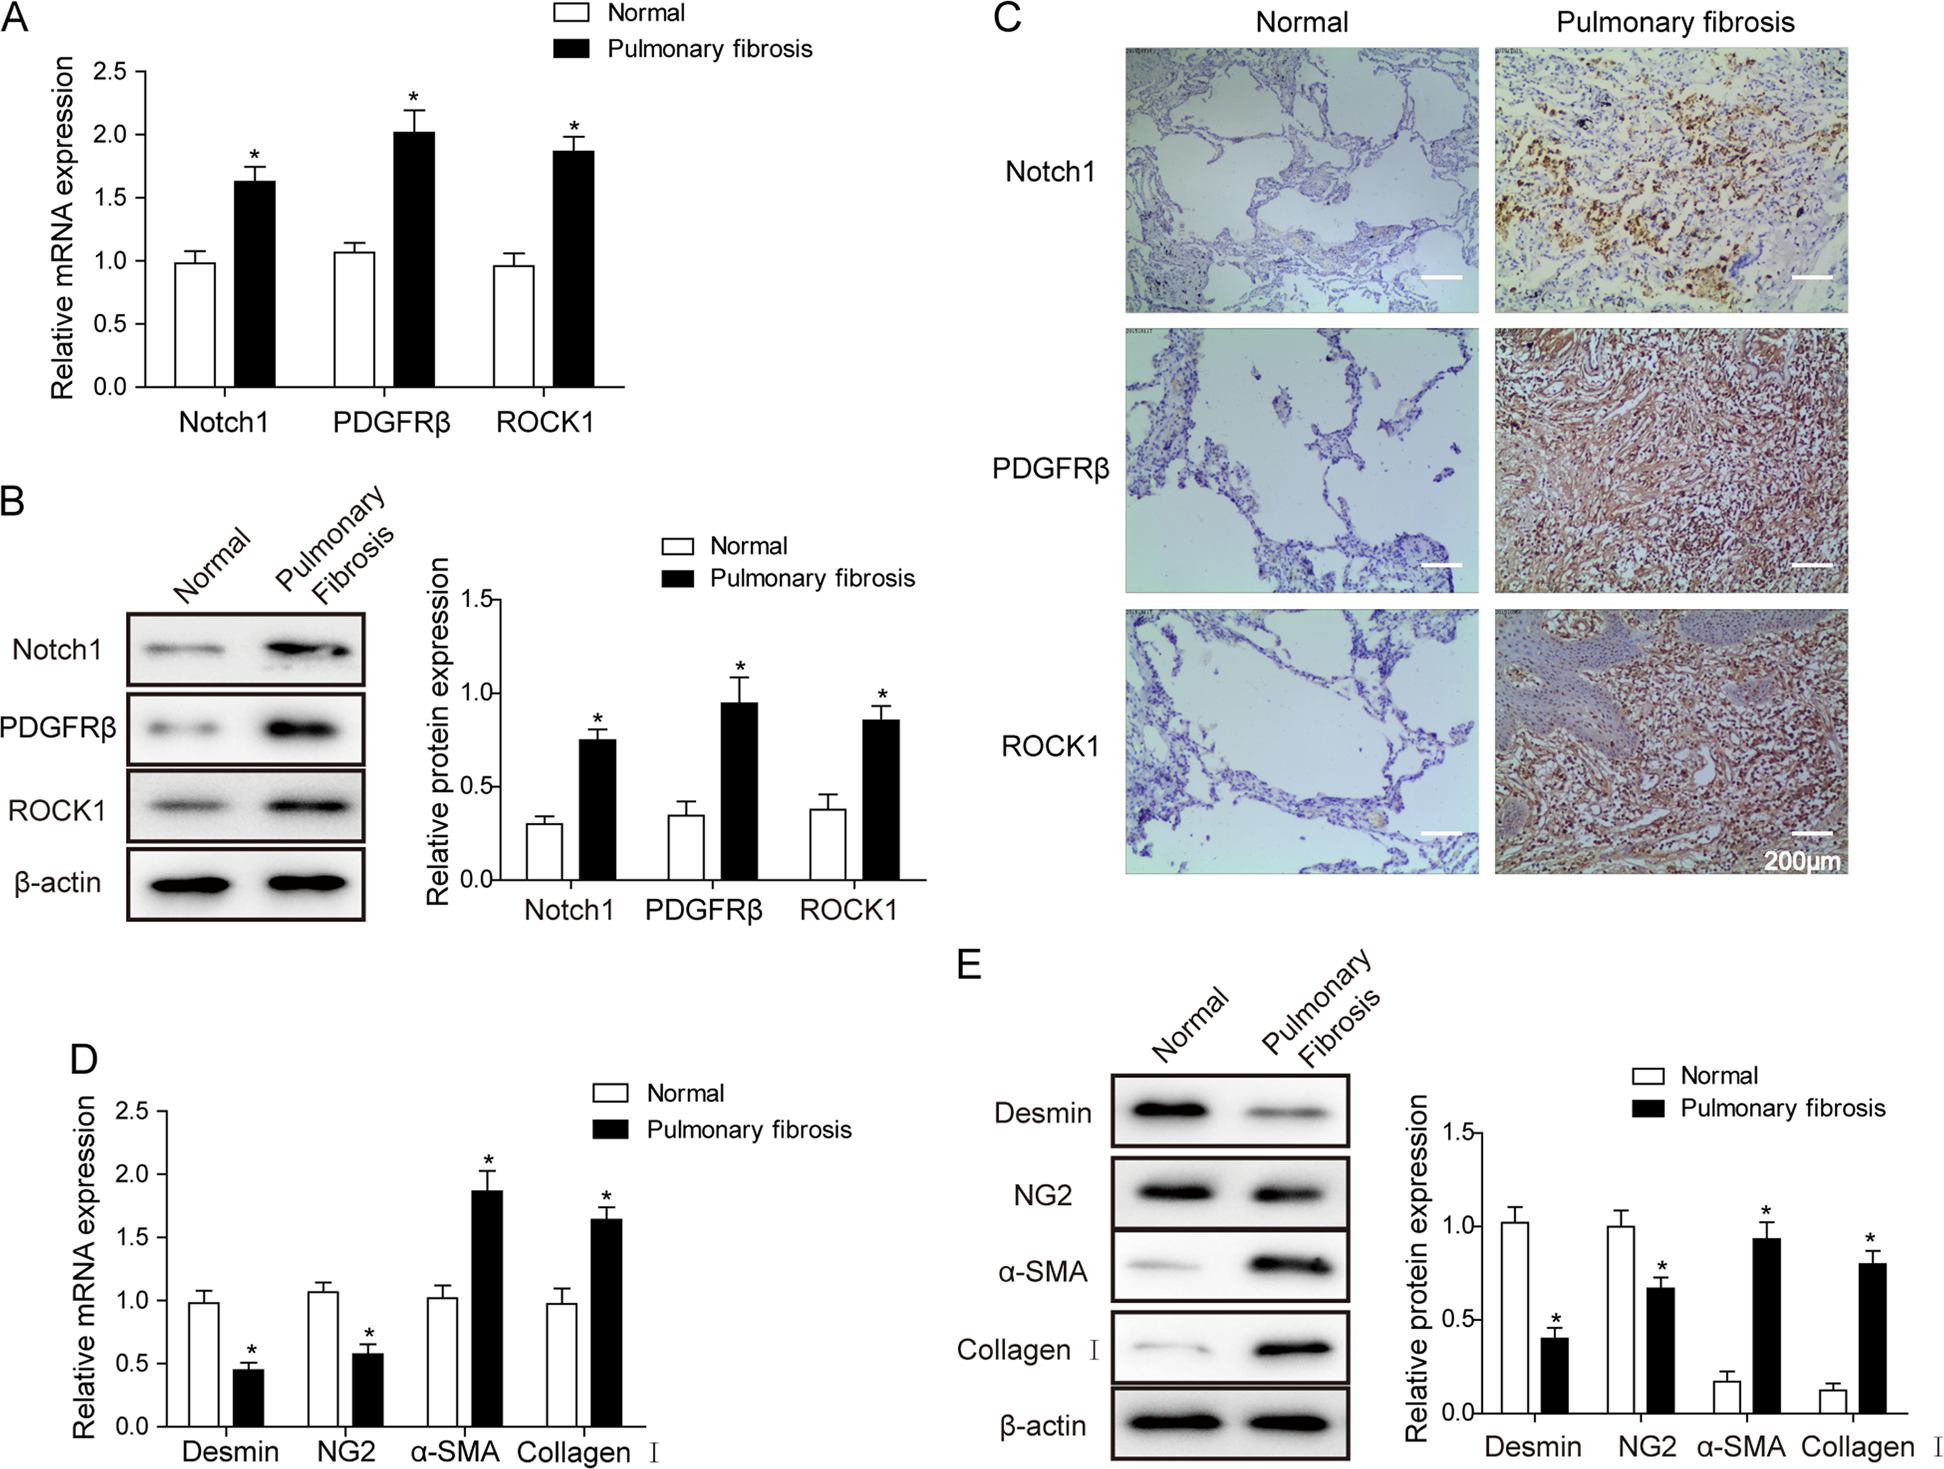 Notch1 signaling enhances collagen expression and fibrosis in